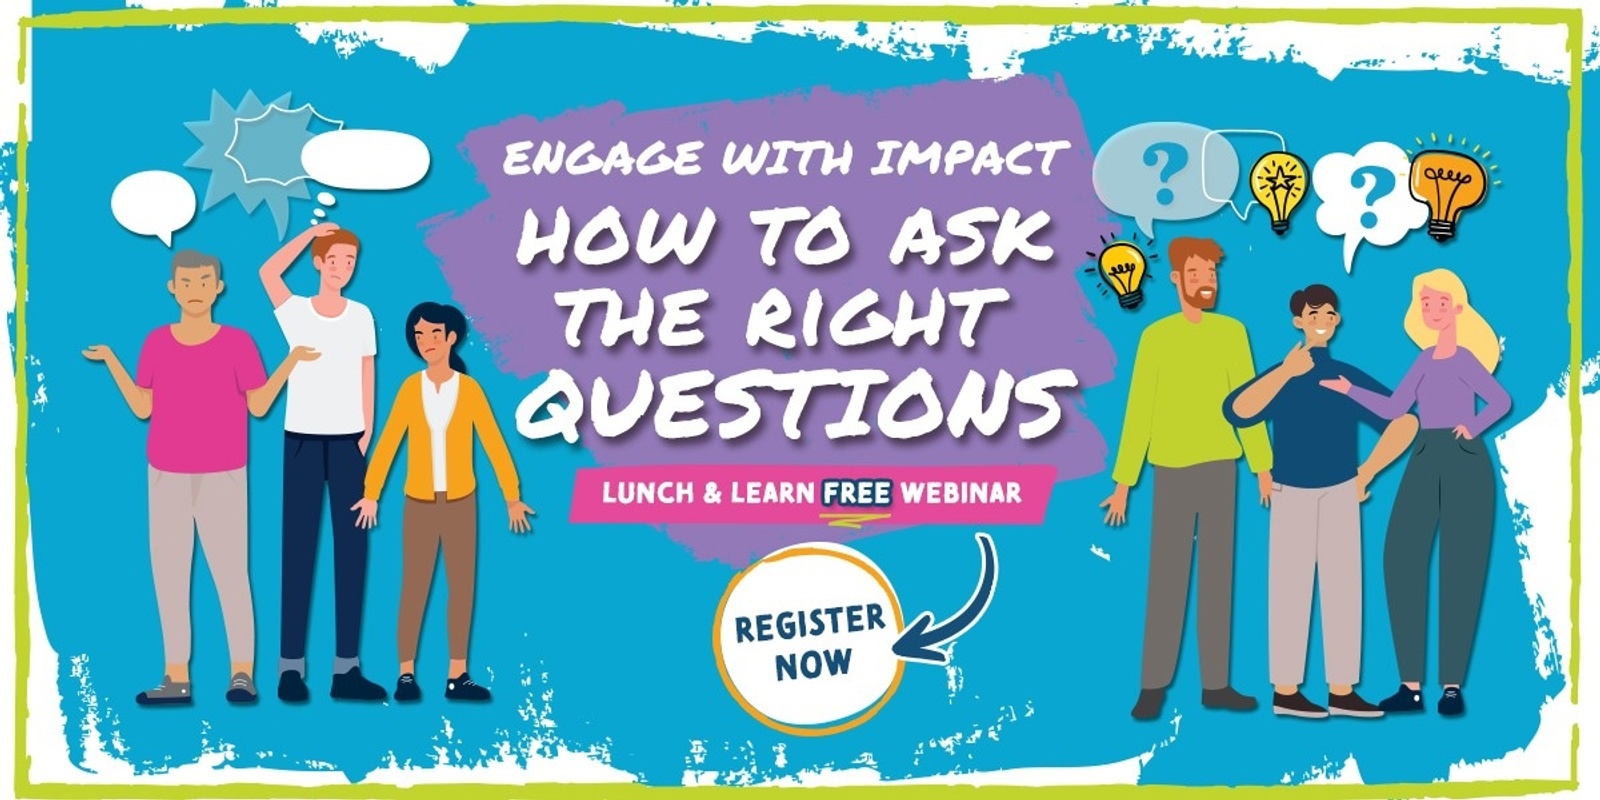 Banner image for Engage with Impact - how to ask the right questions